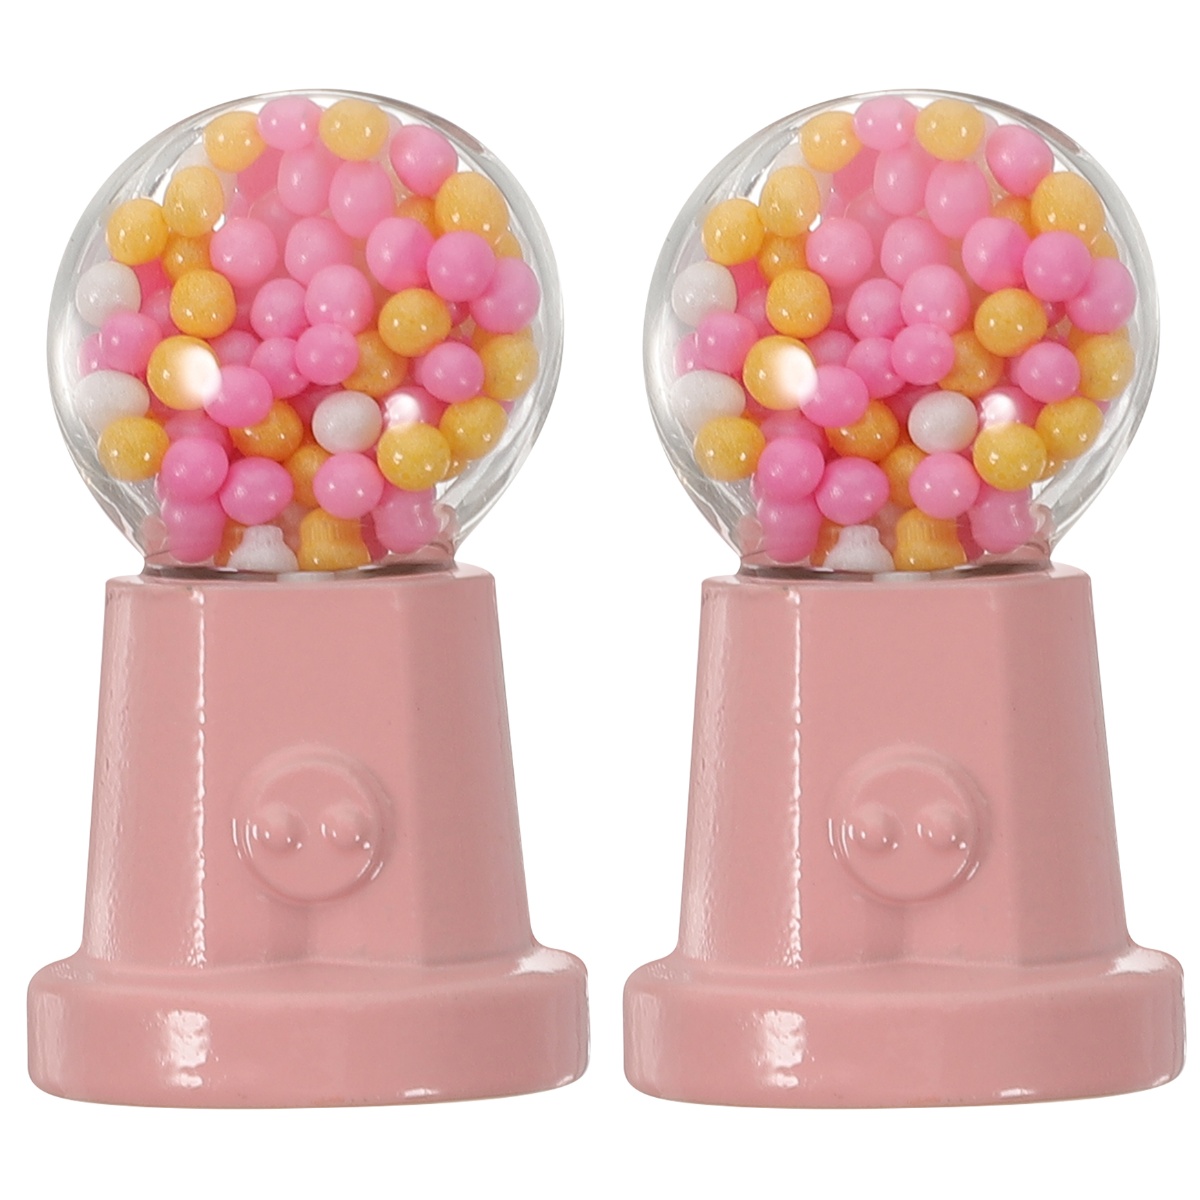 Set of 2 Mini Candy Machine Miniature Toys Accessories Doll House Furniture Gumball Twisters Dispenser Child - image 1 of 6